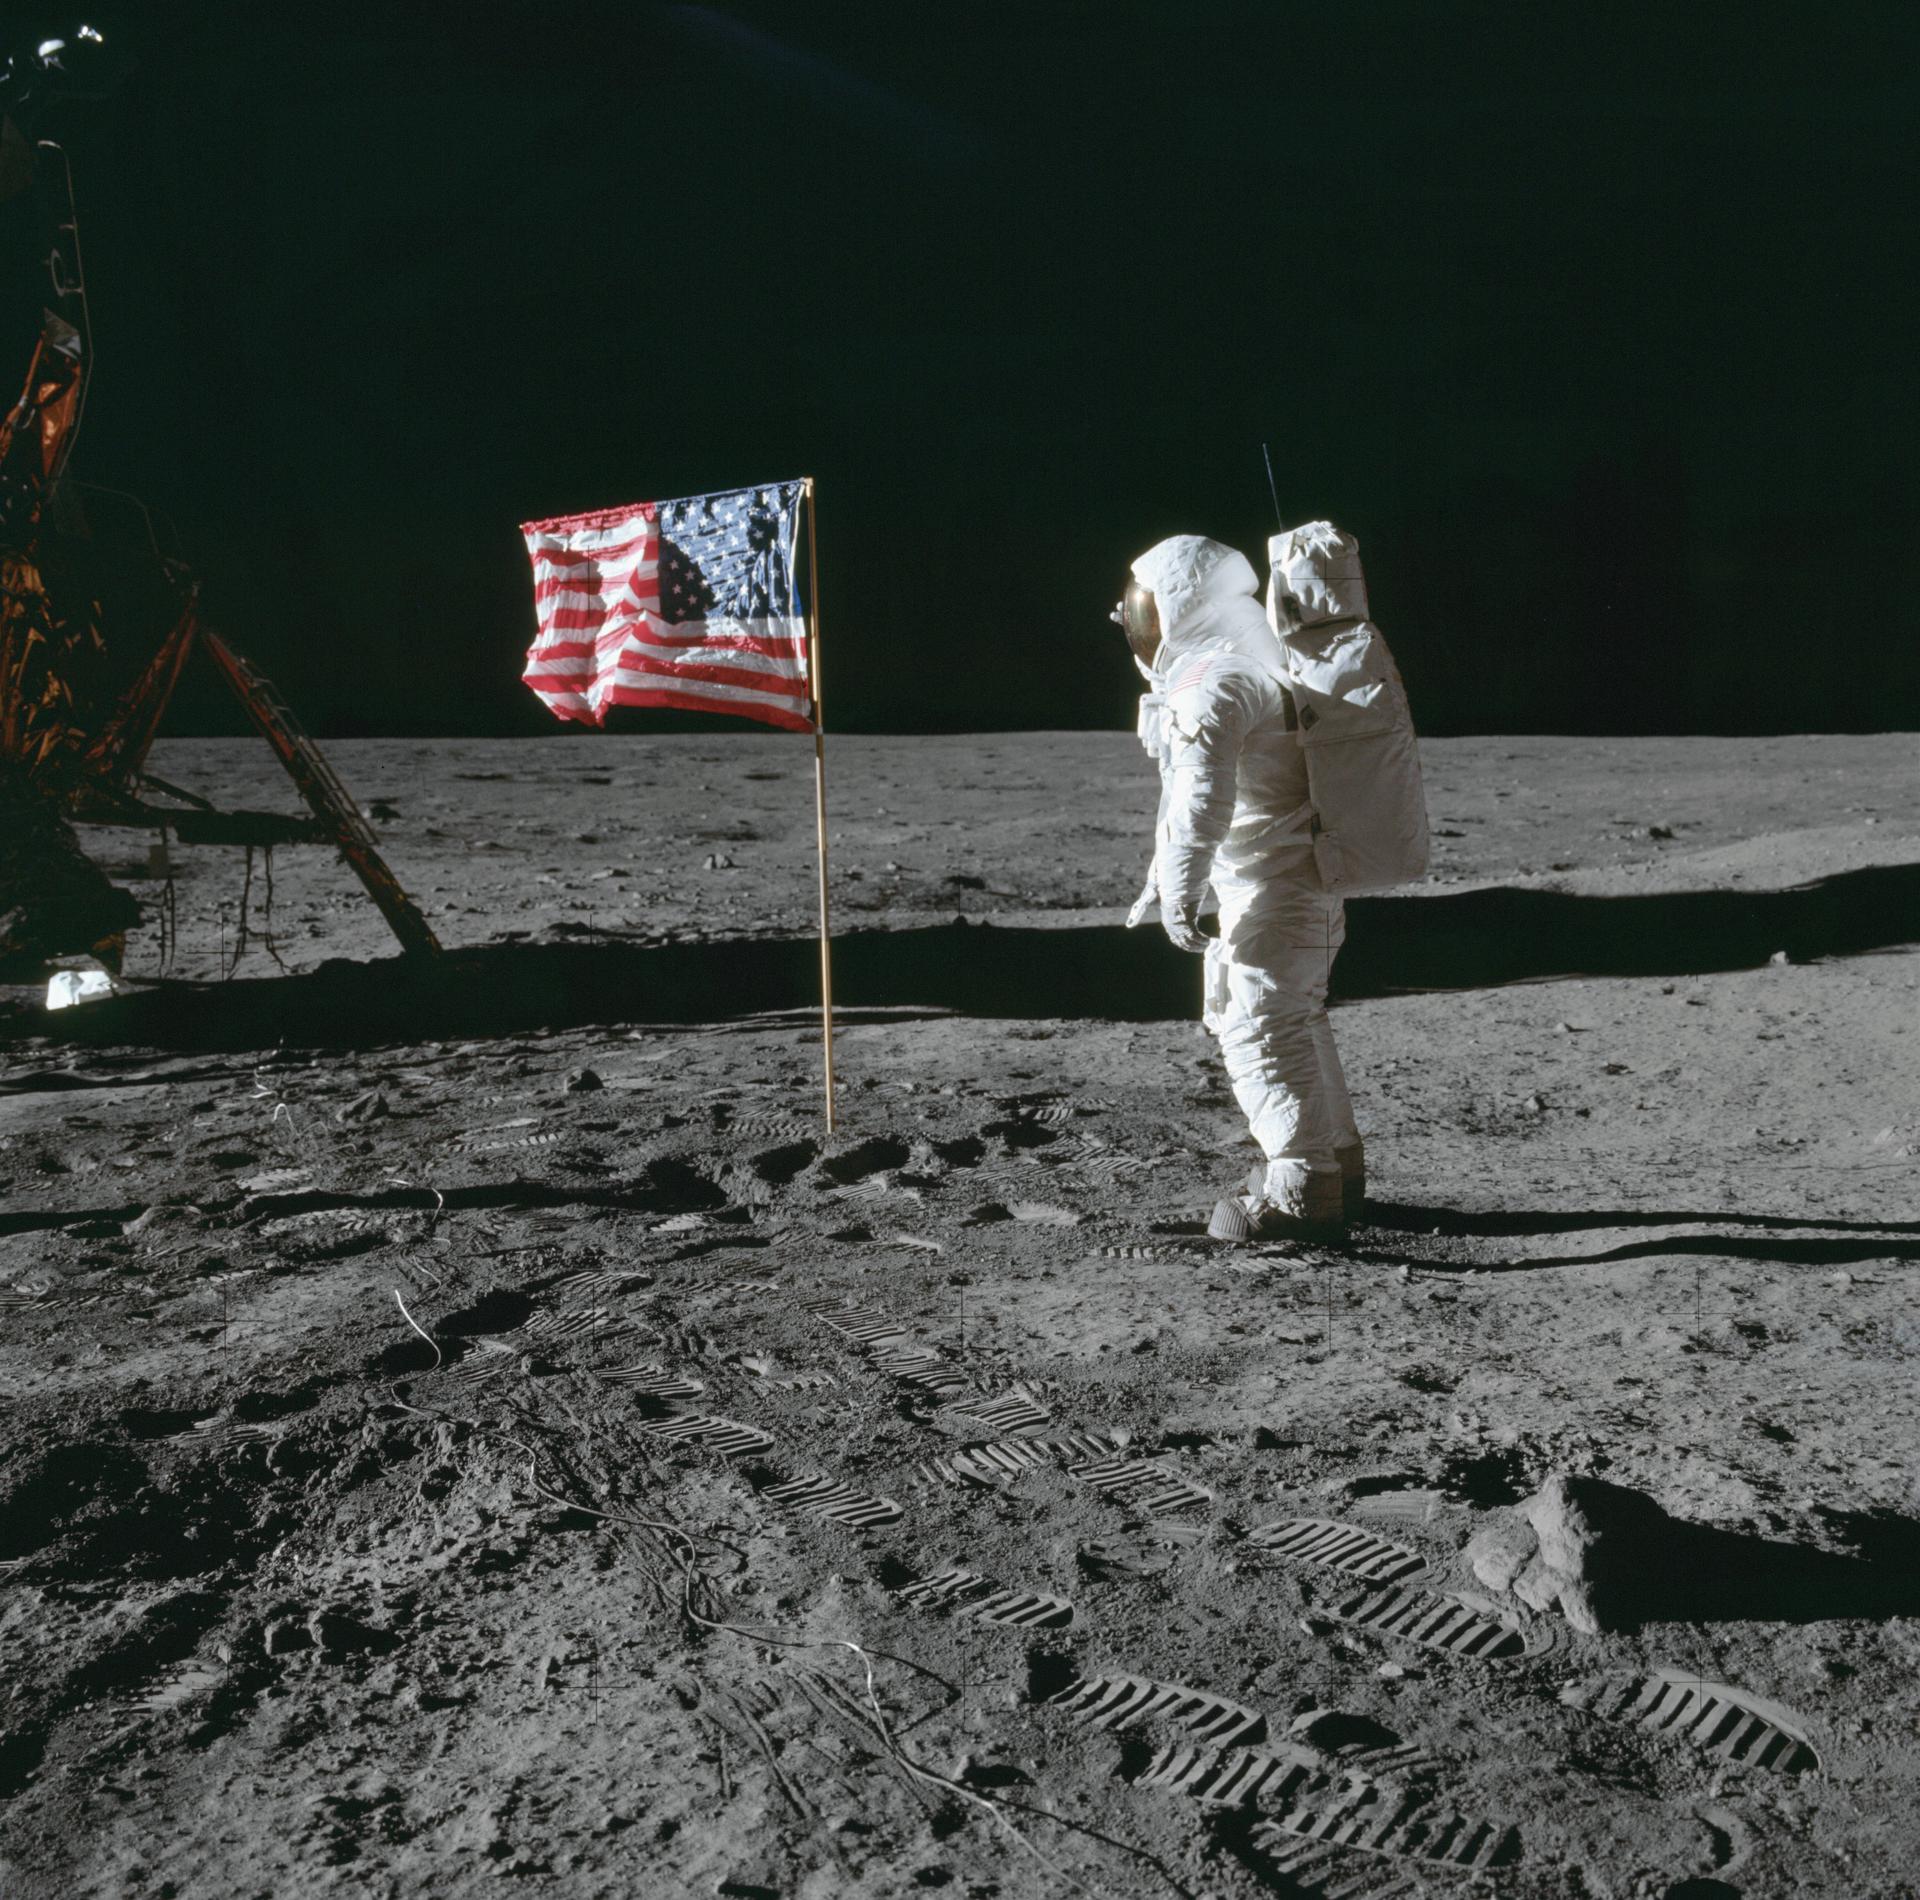 Astronaut Edwin E. Aldrin Jr., lunar module pilot of the first lunar landing mission, poses for a photograph beside the deployed United States flag during Apollo 11 extravehicular activity (EVA) on the lunar surface. Image courtesy of NASA